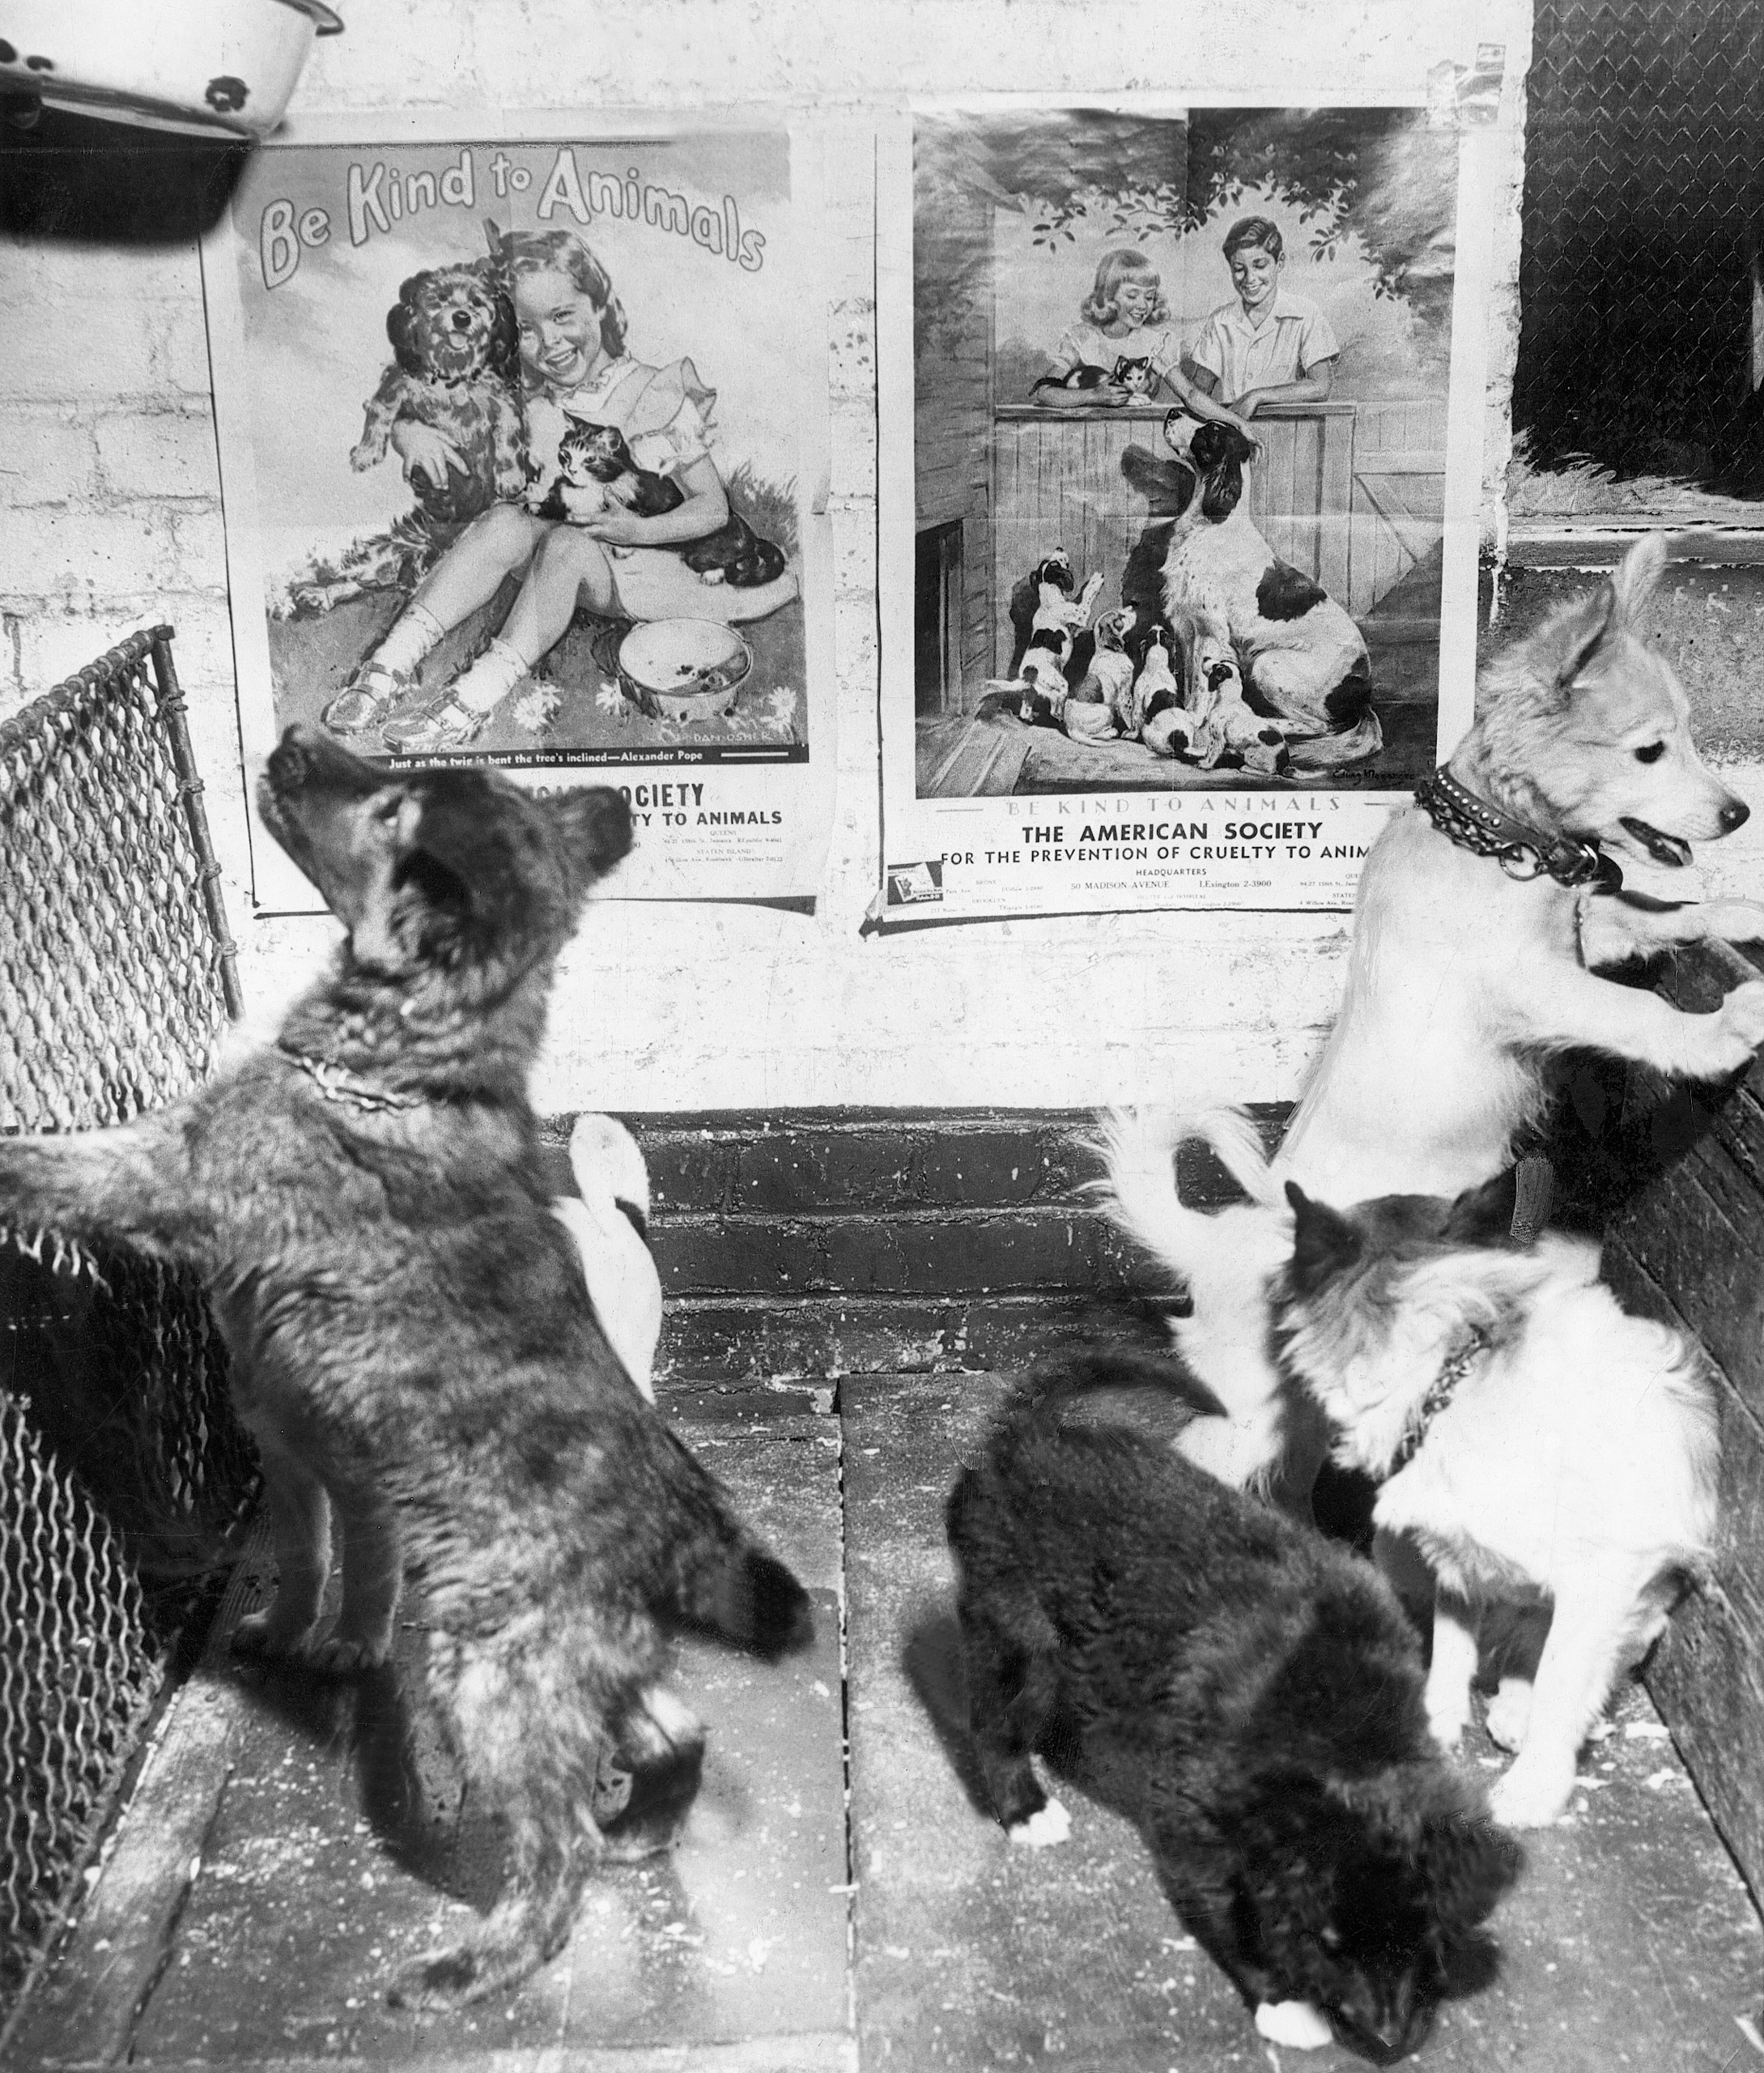 Puppies for adoption at ASPCA Animal Shelter in NYC with humane-themed posters, 1950s.